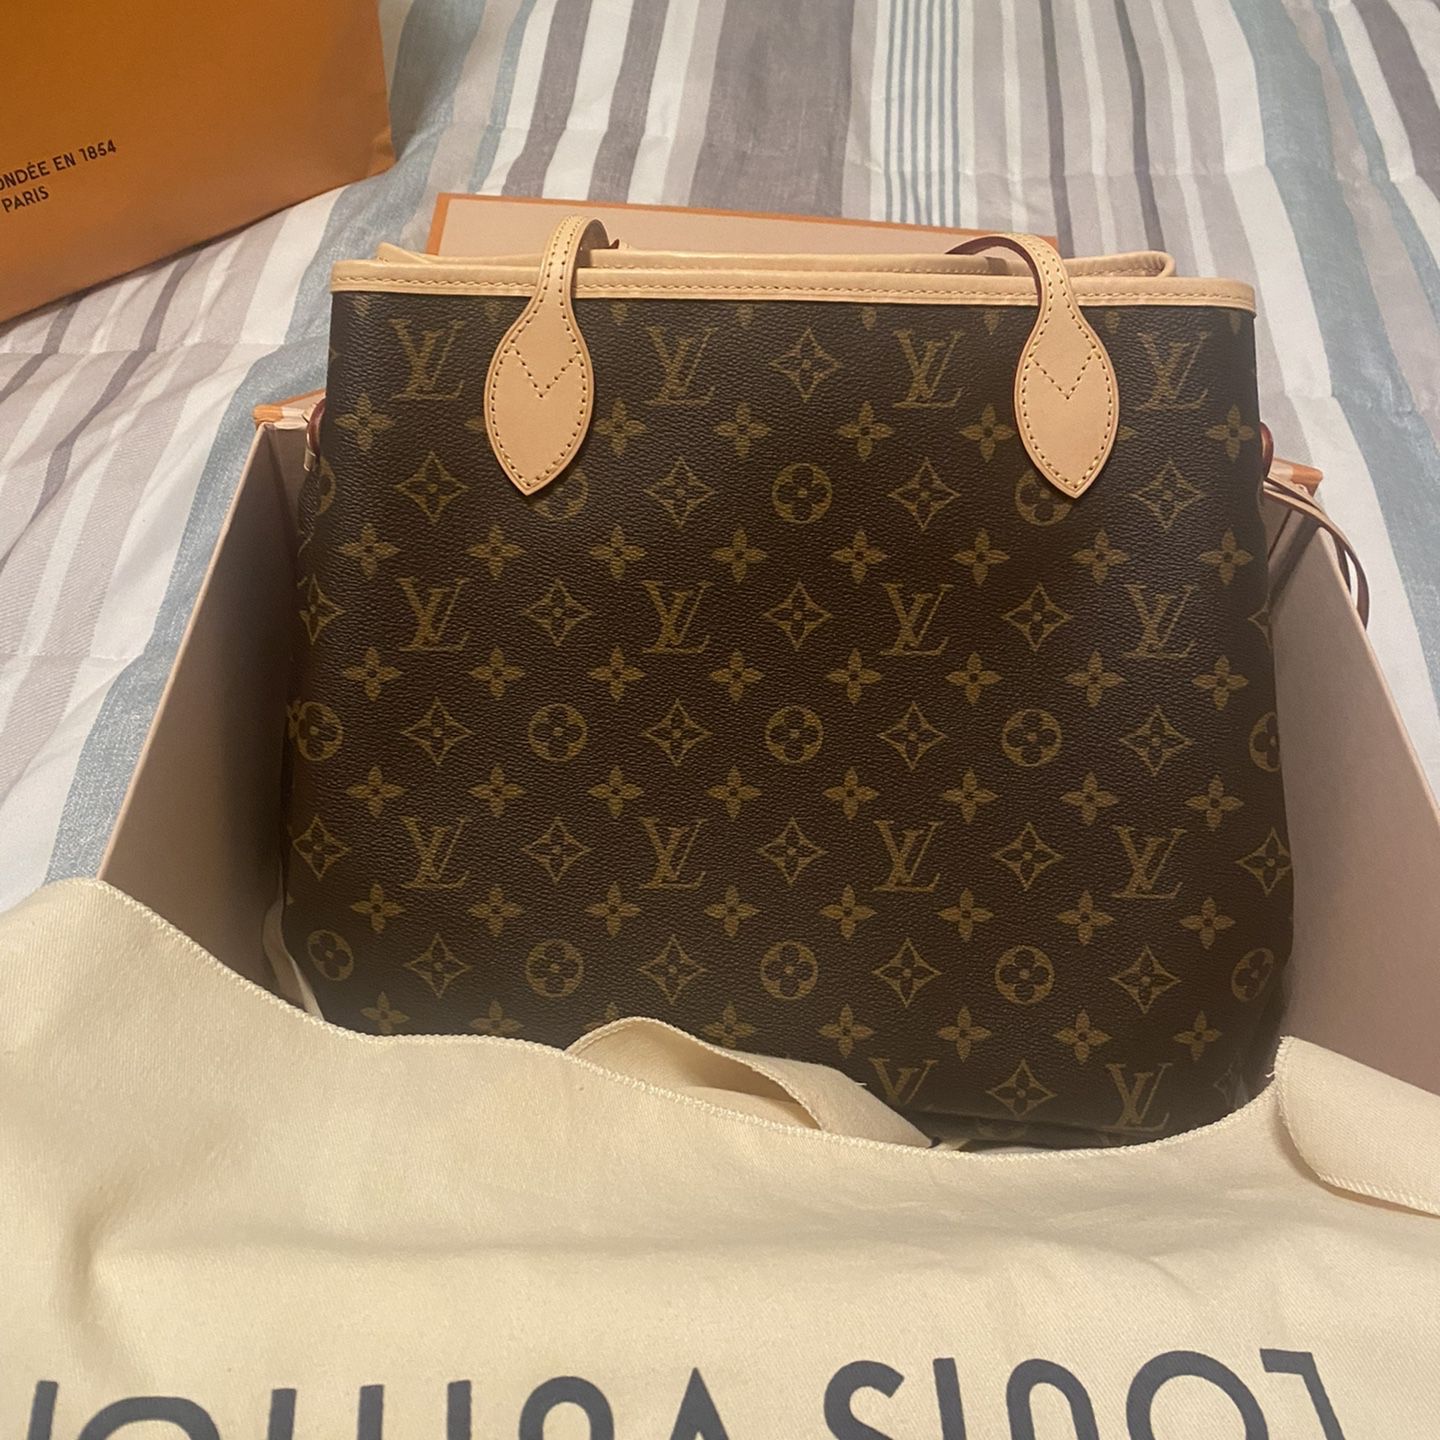 Louis Vuitton NBA Backpack for Sale in Johns Creek, GA - OfferUp